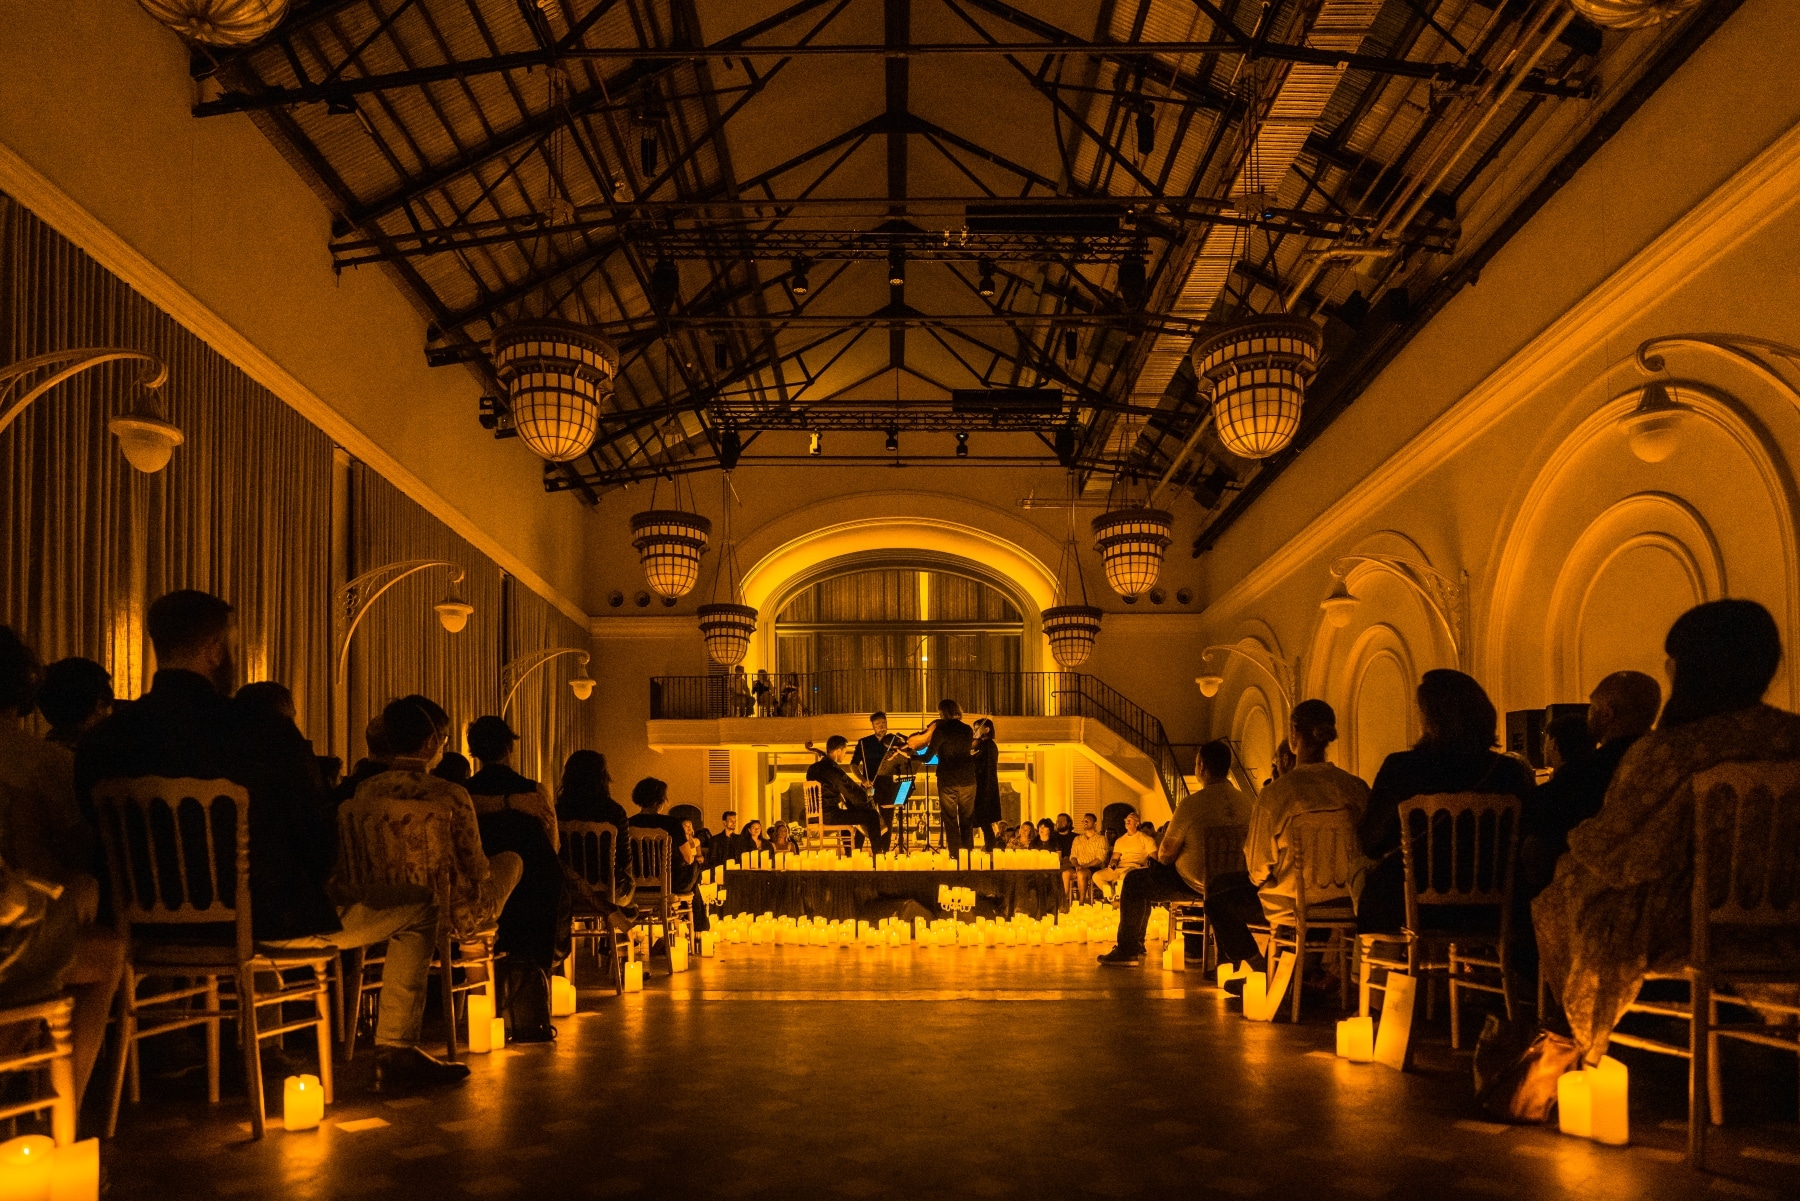 The Eveleigh by the Grounds illuminated by candlelight